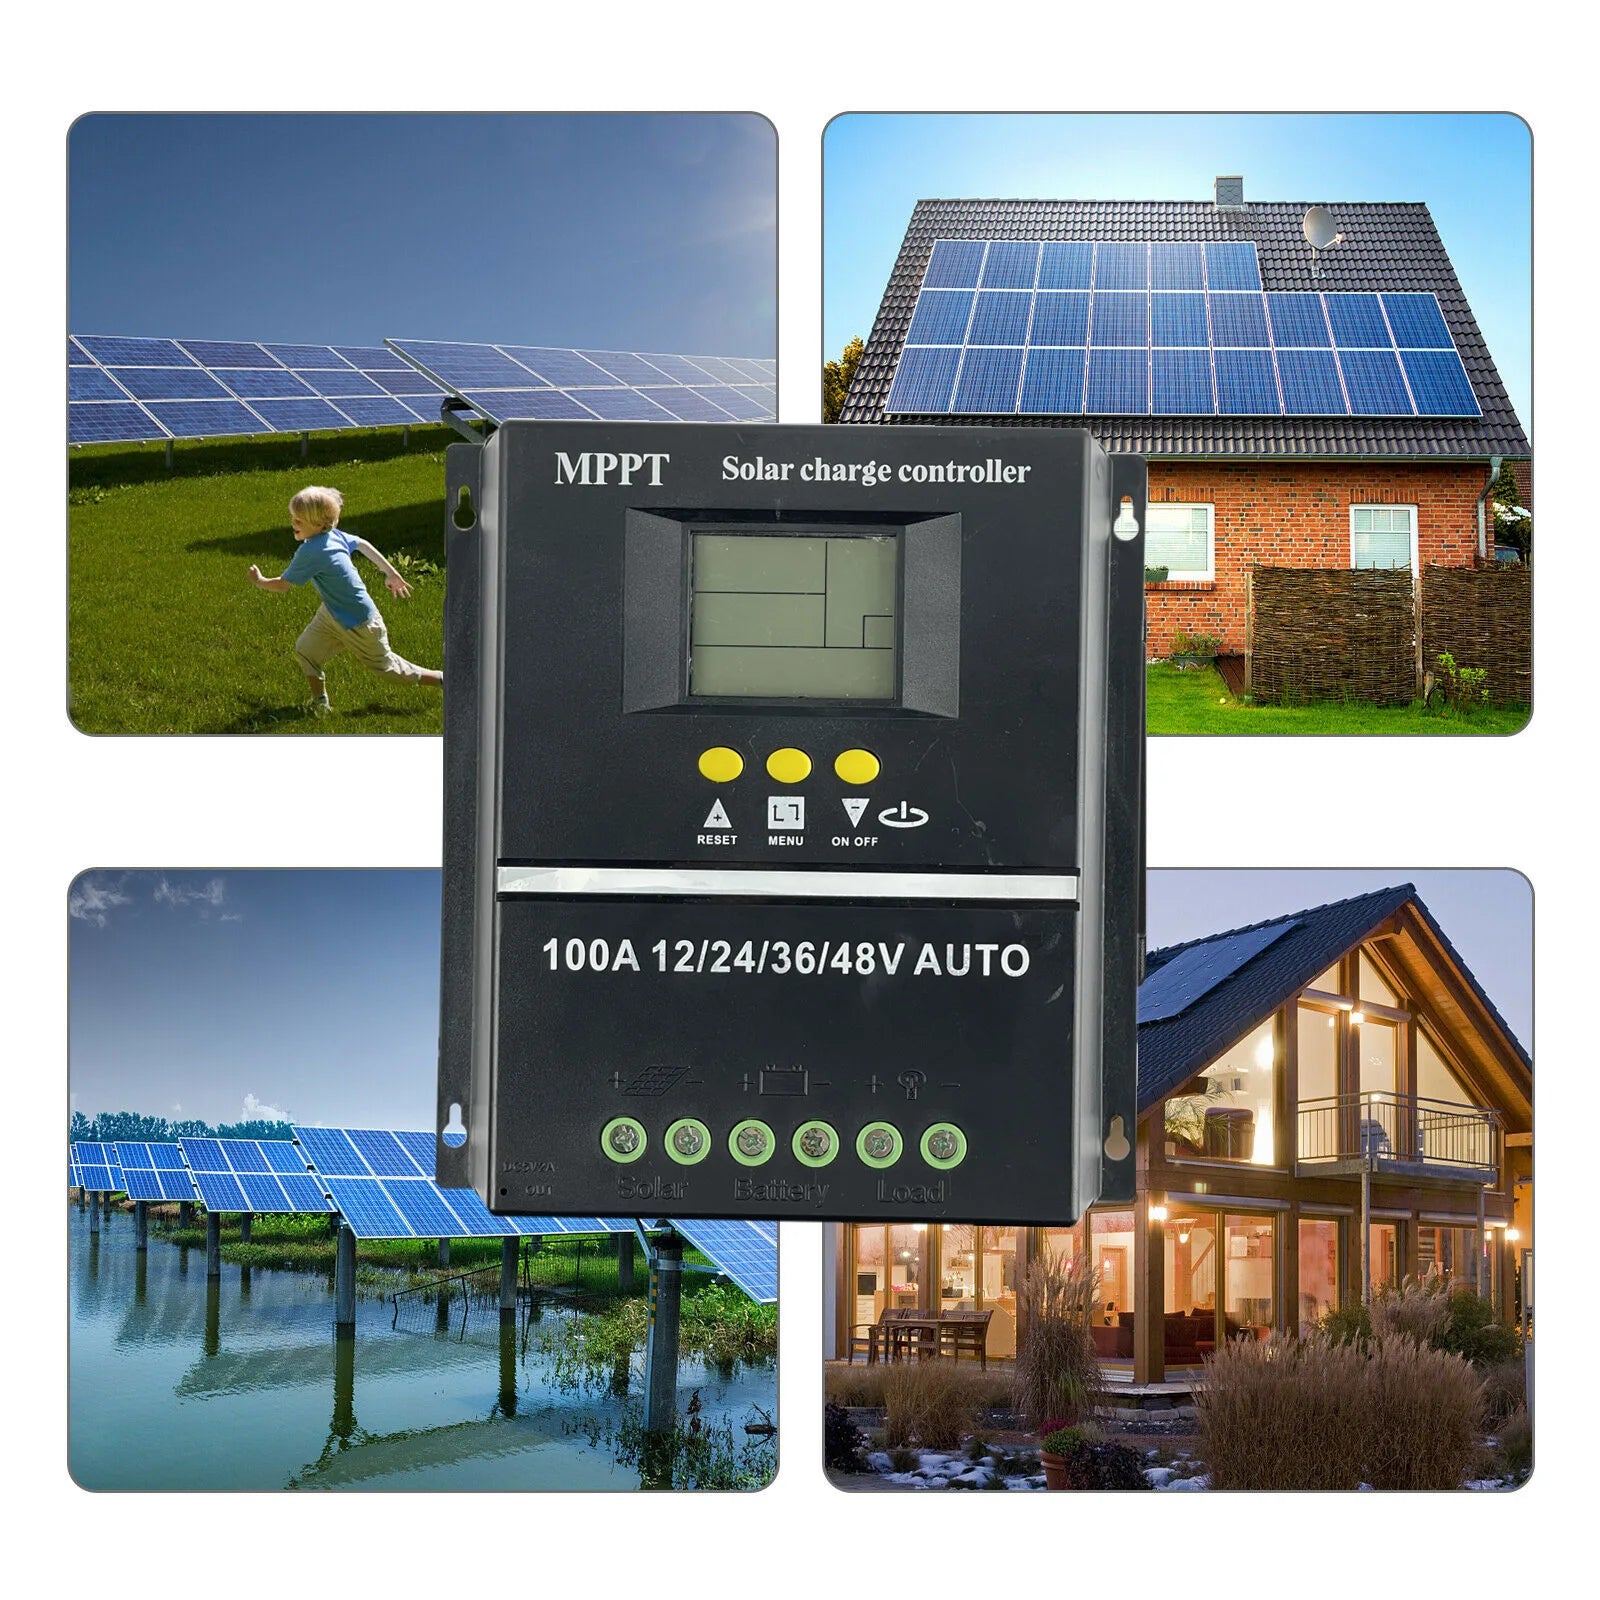 Advanced solar charger controller with LCD display, supporting 4 voltage levels and 100A charging capacity.